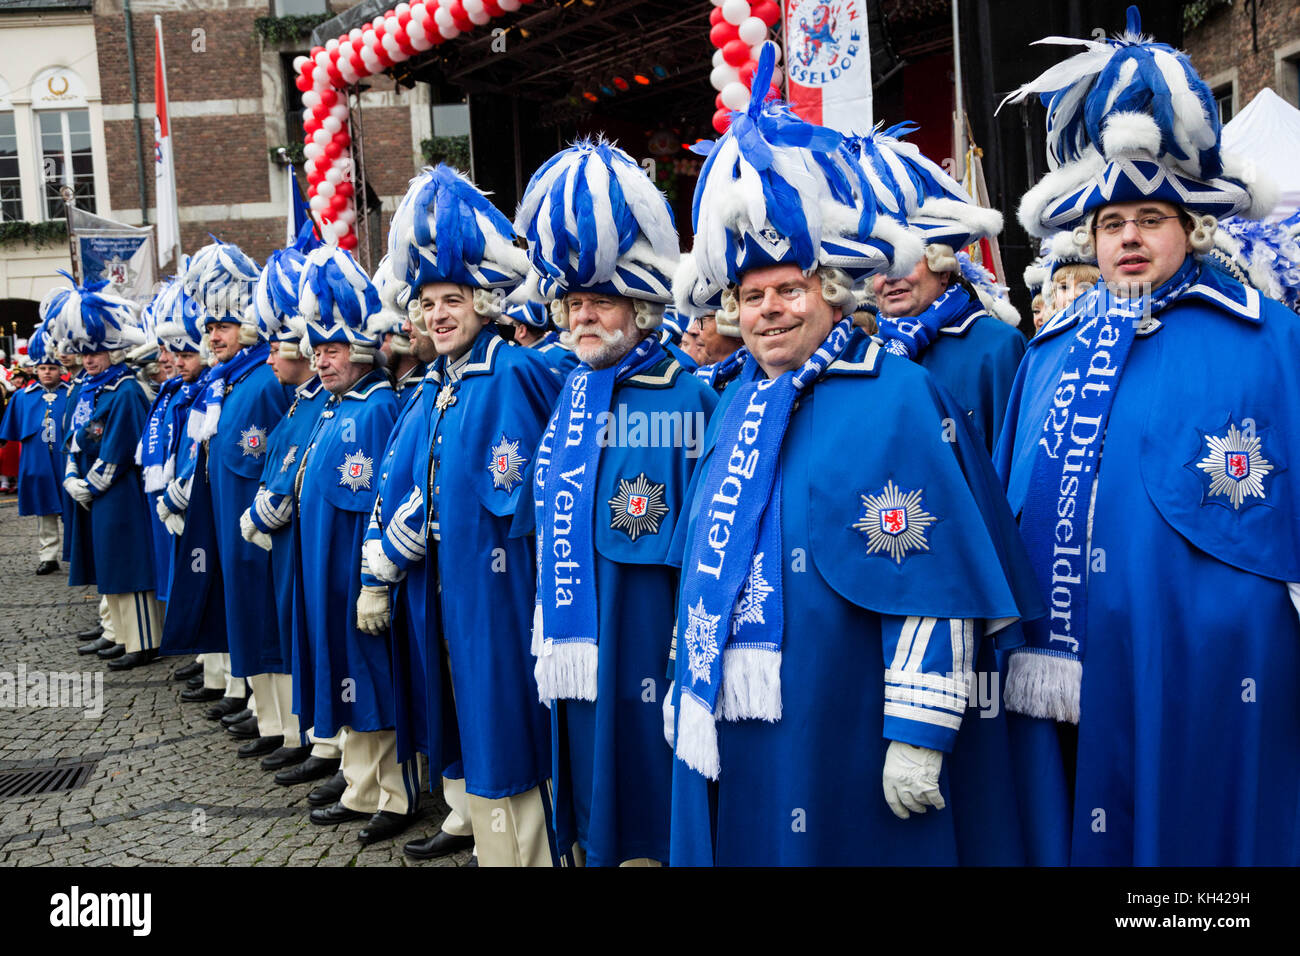 The German Carnival season traditionally begins with the Hoppeditz Erwachen event on 11 November, Düsseldorf, Germany, and runs to Ash Wednesday the following year. Stock Photo